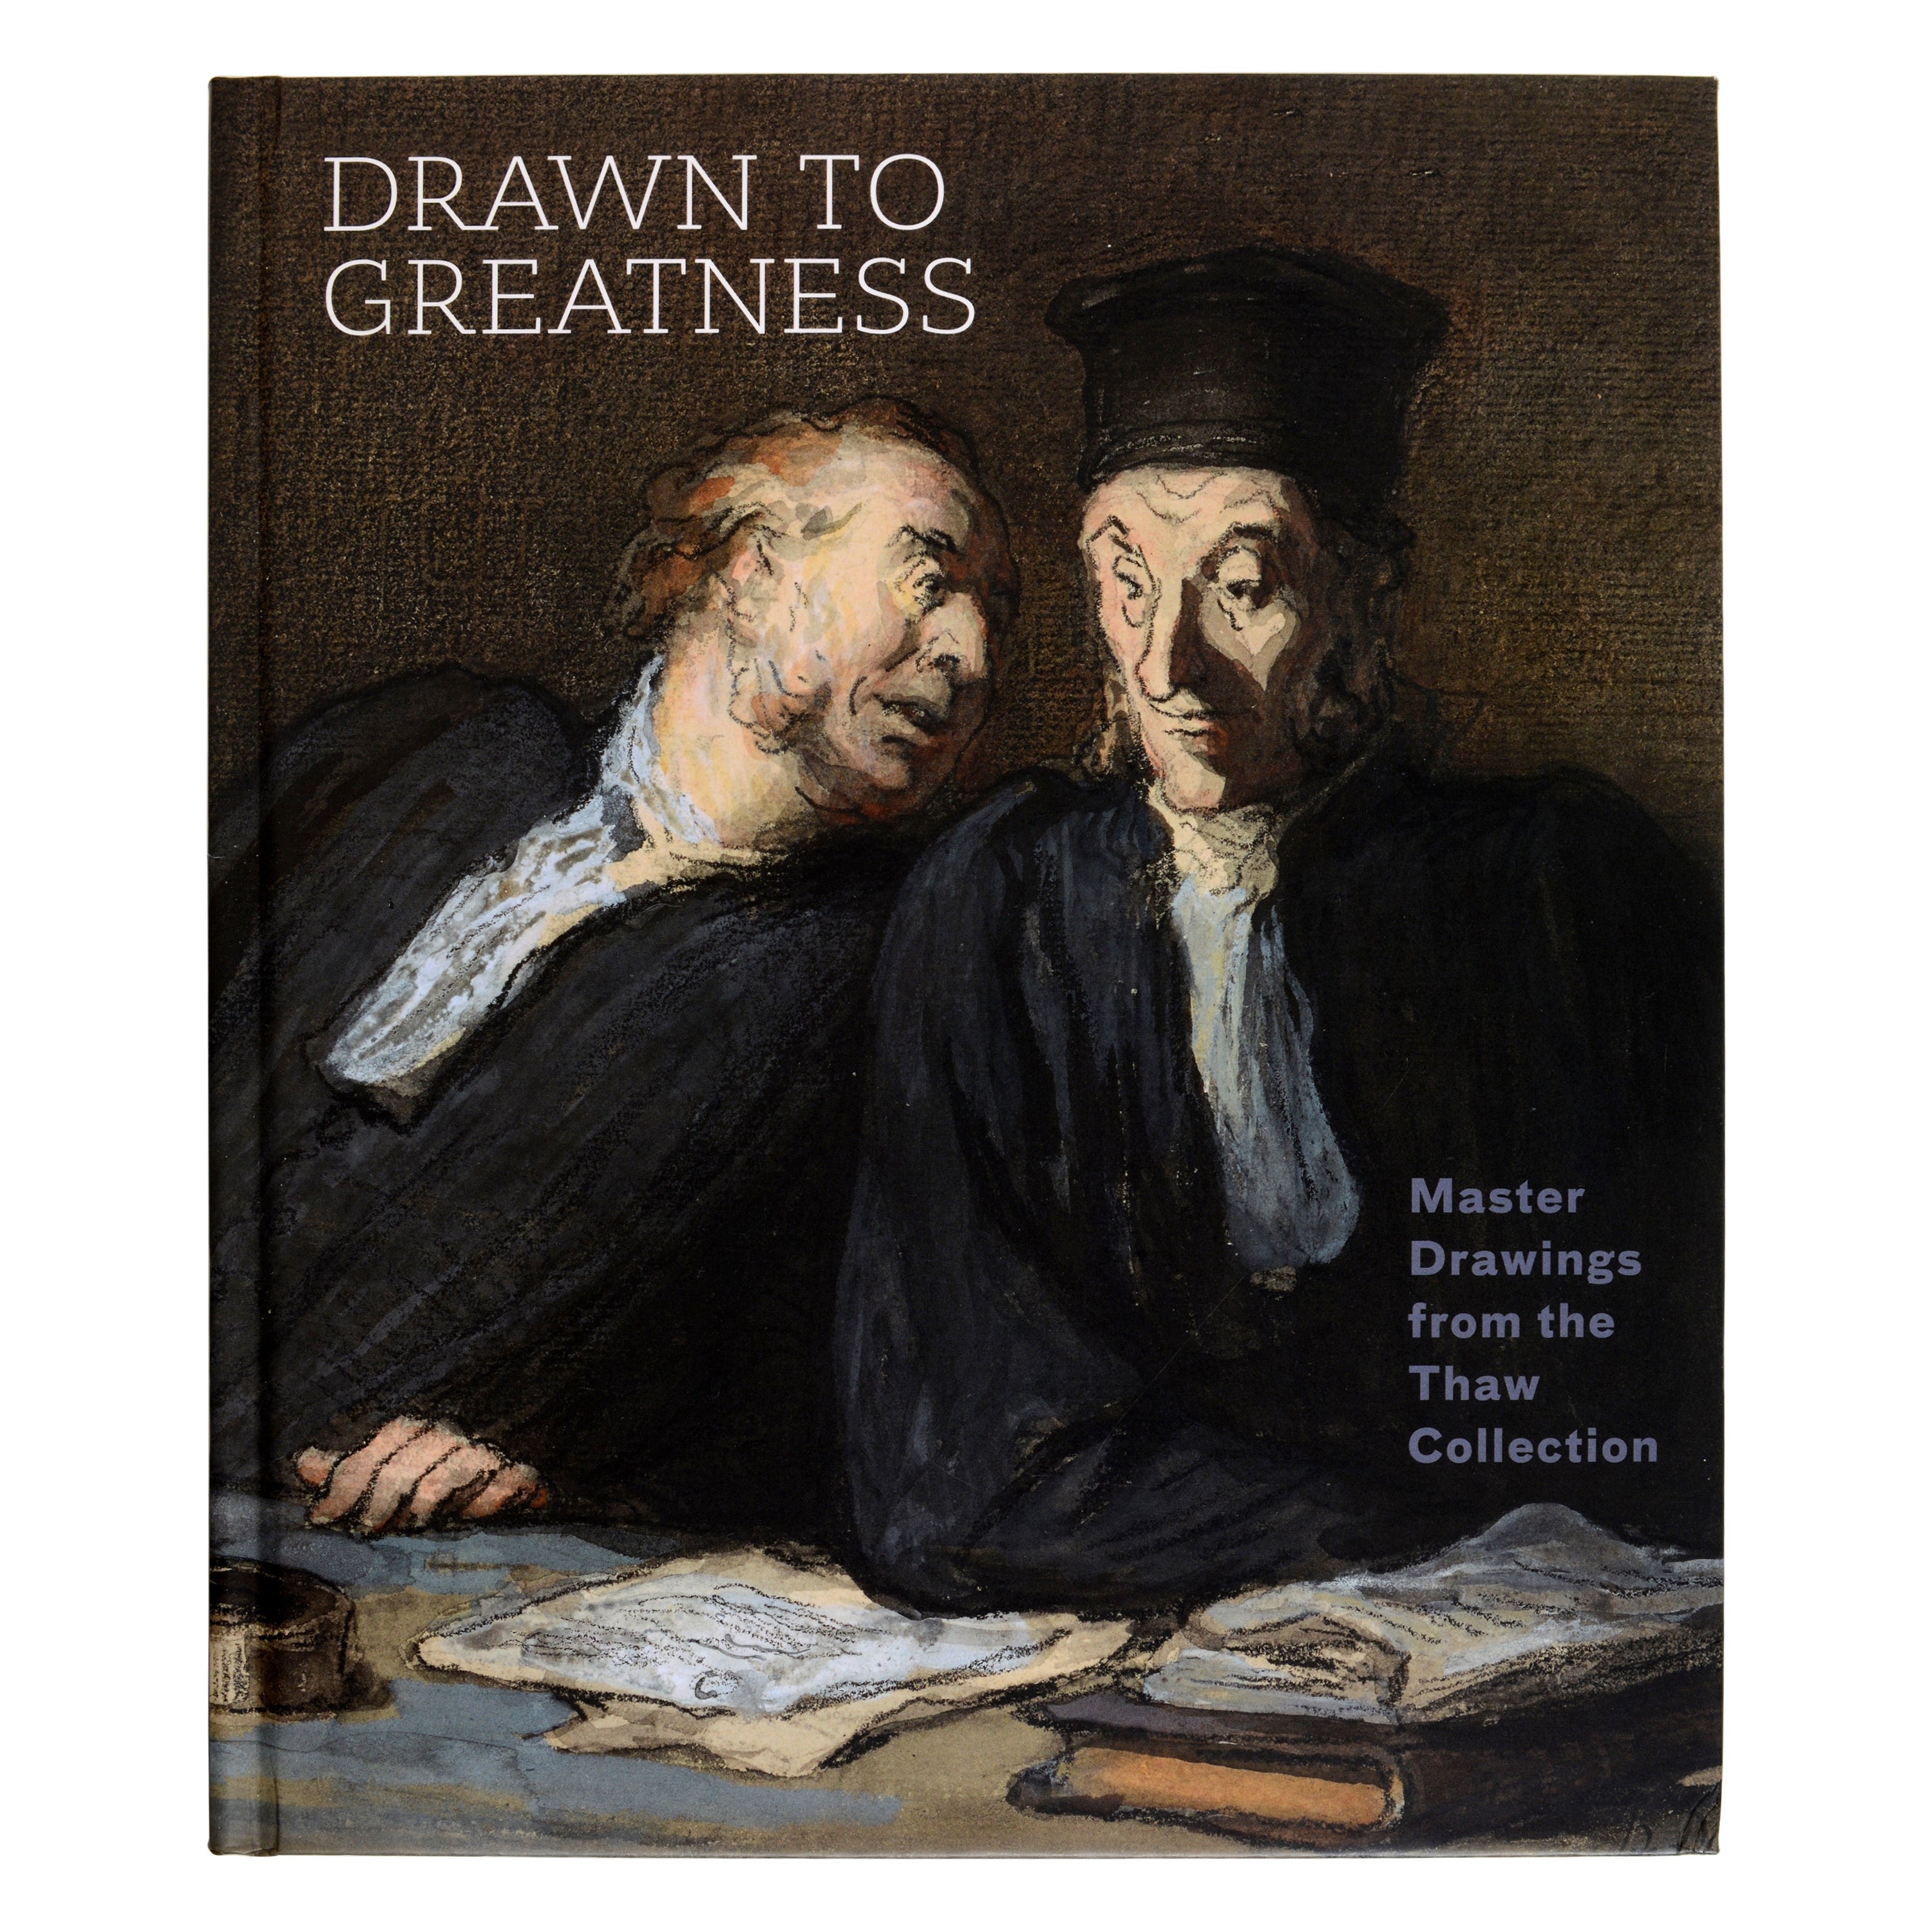 Drawn to Greatness: Master Drawings from the Thaw Collection by Pierpont Morgan For Sale